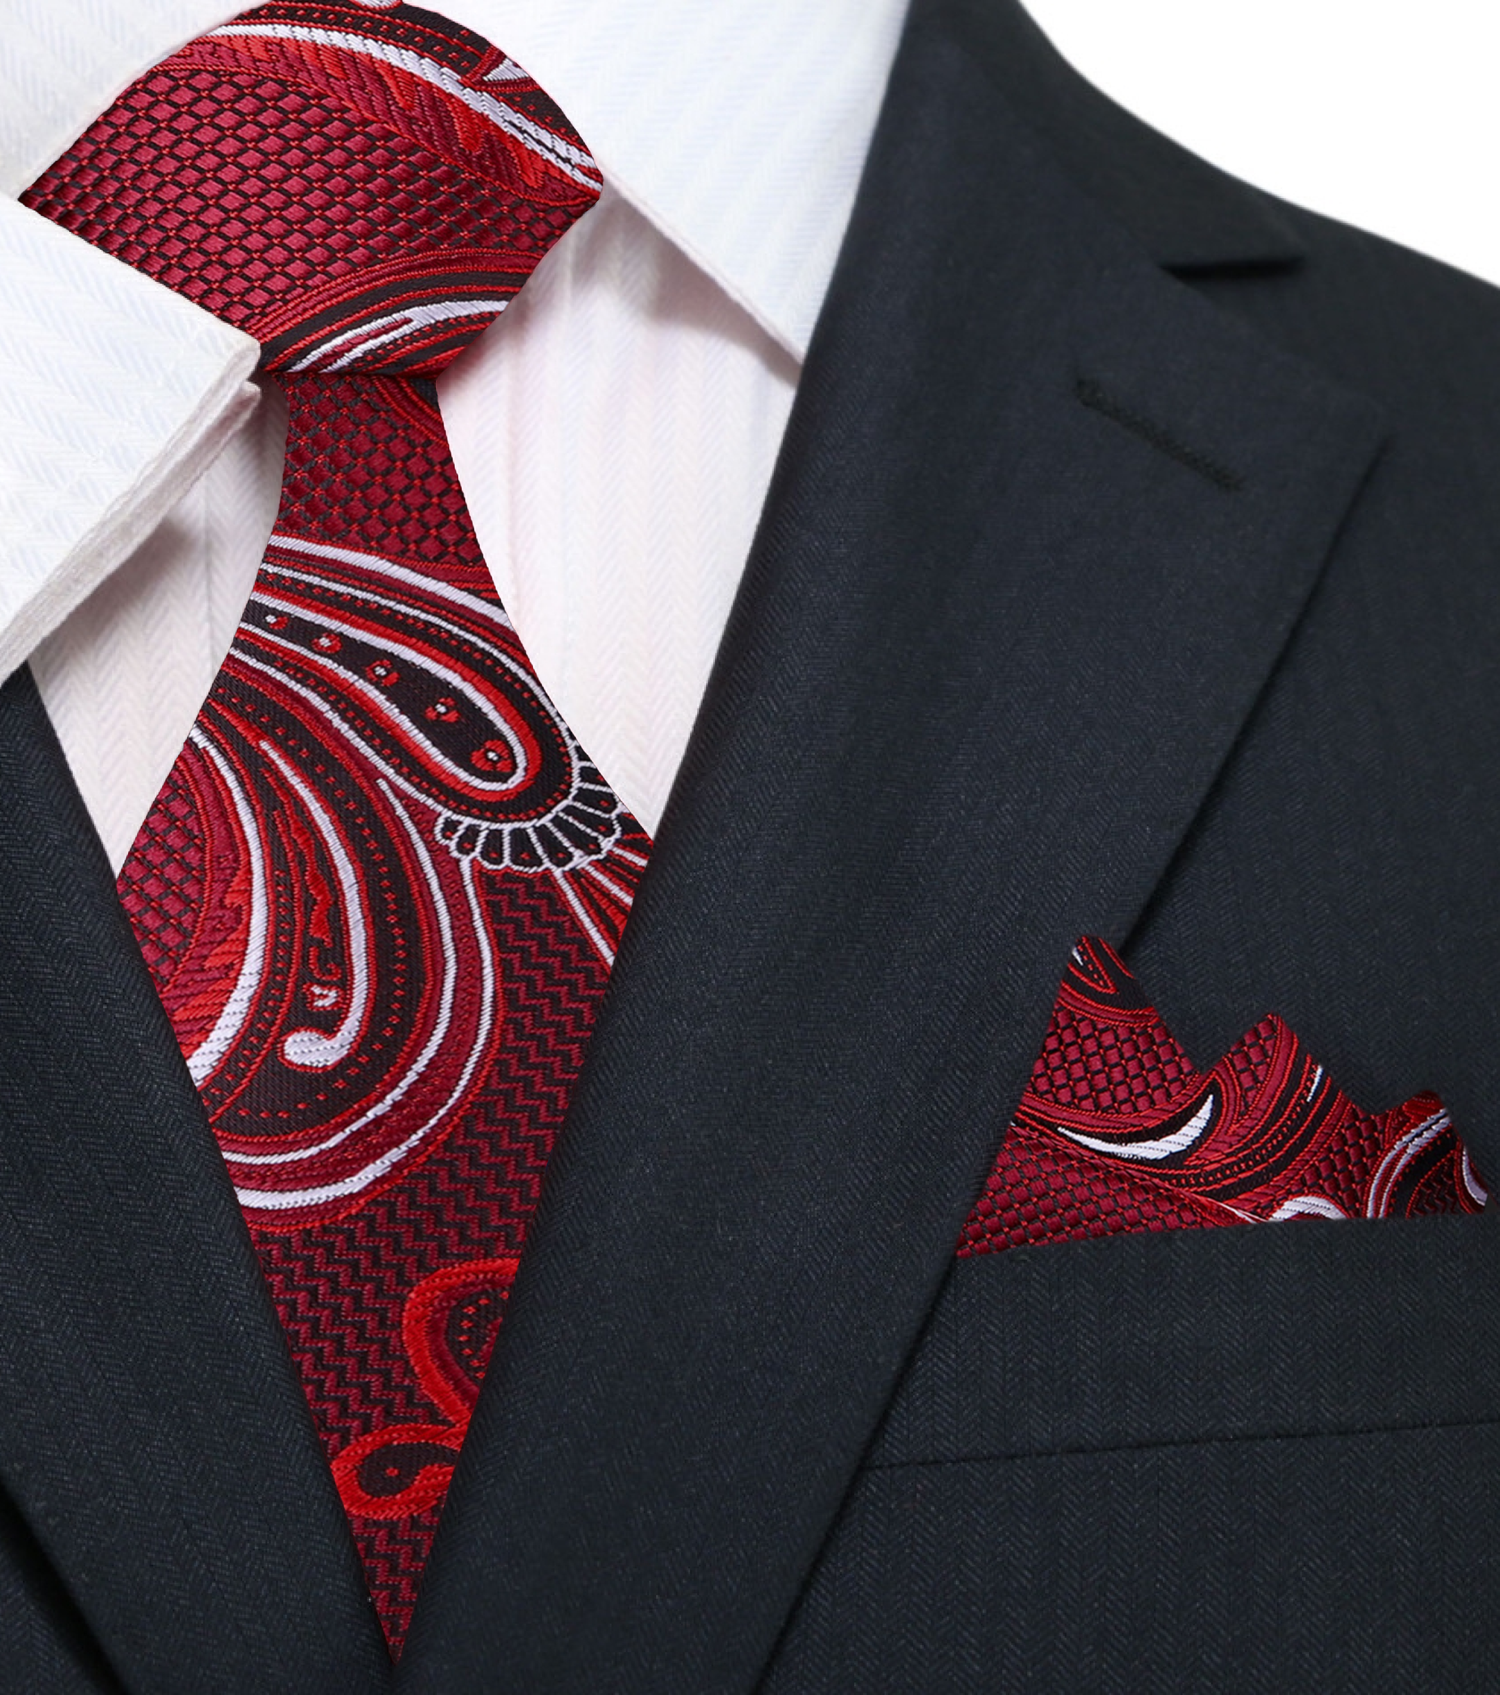 A Red, White, Black Color Paisley Pattern Silk Necktie, Matching Pocket Square